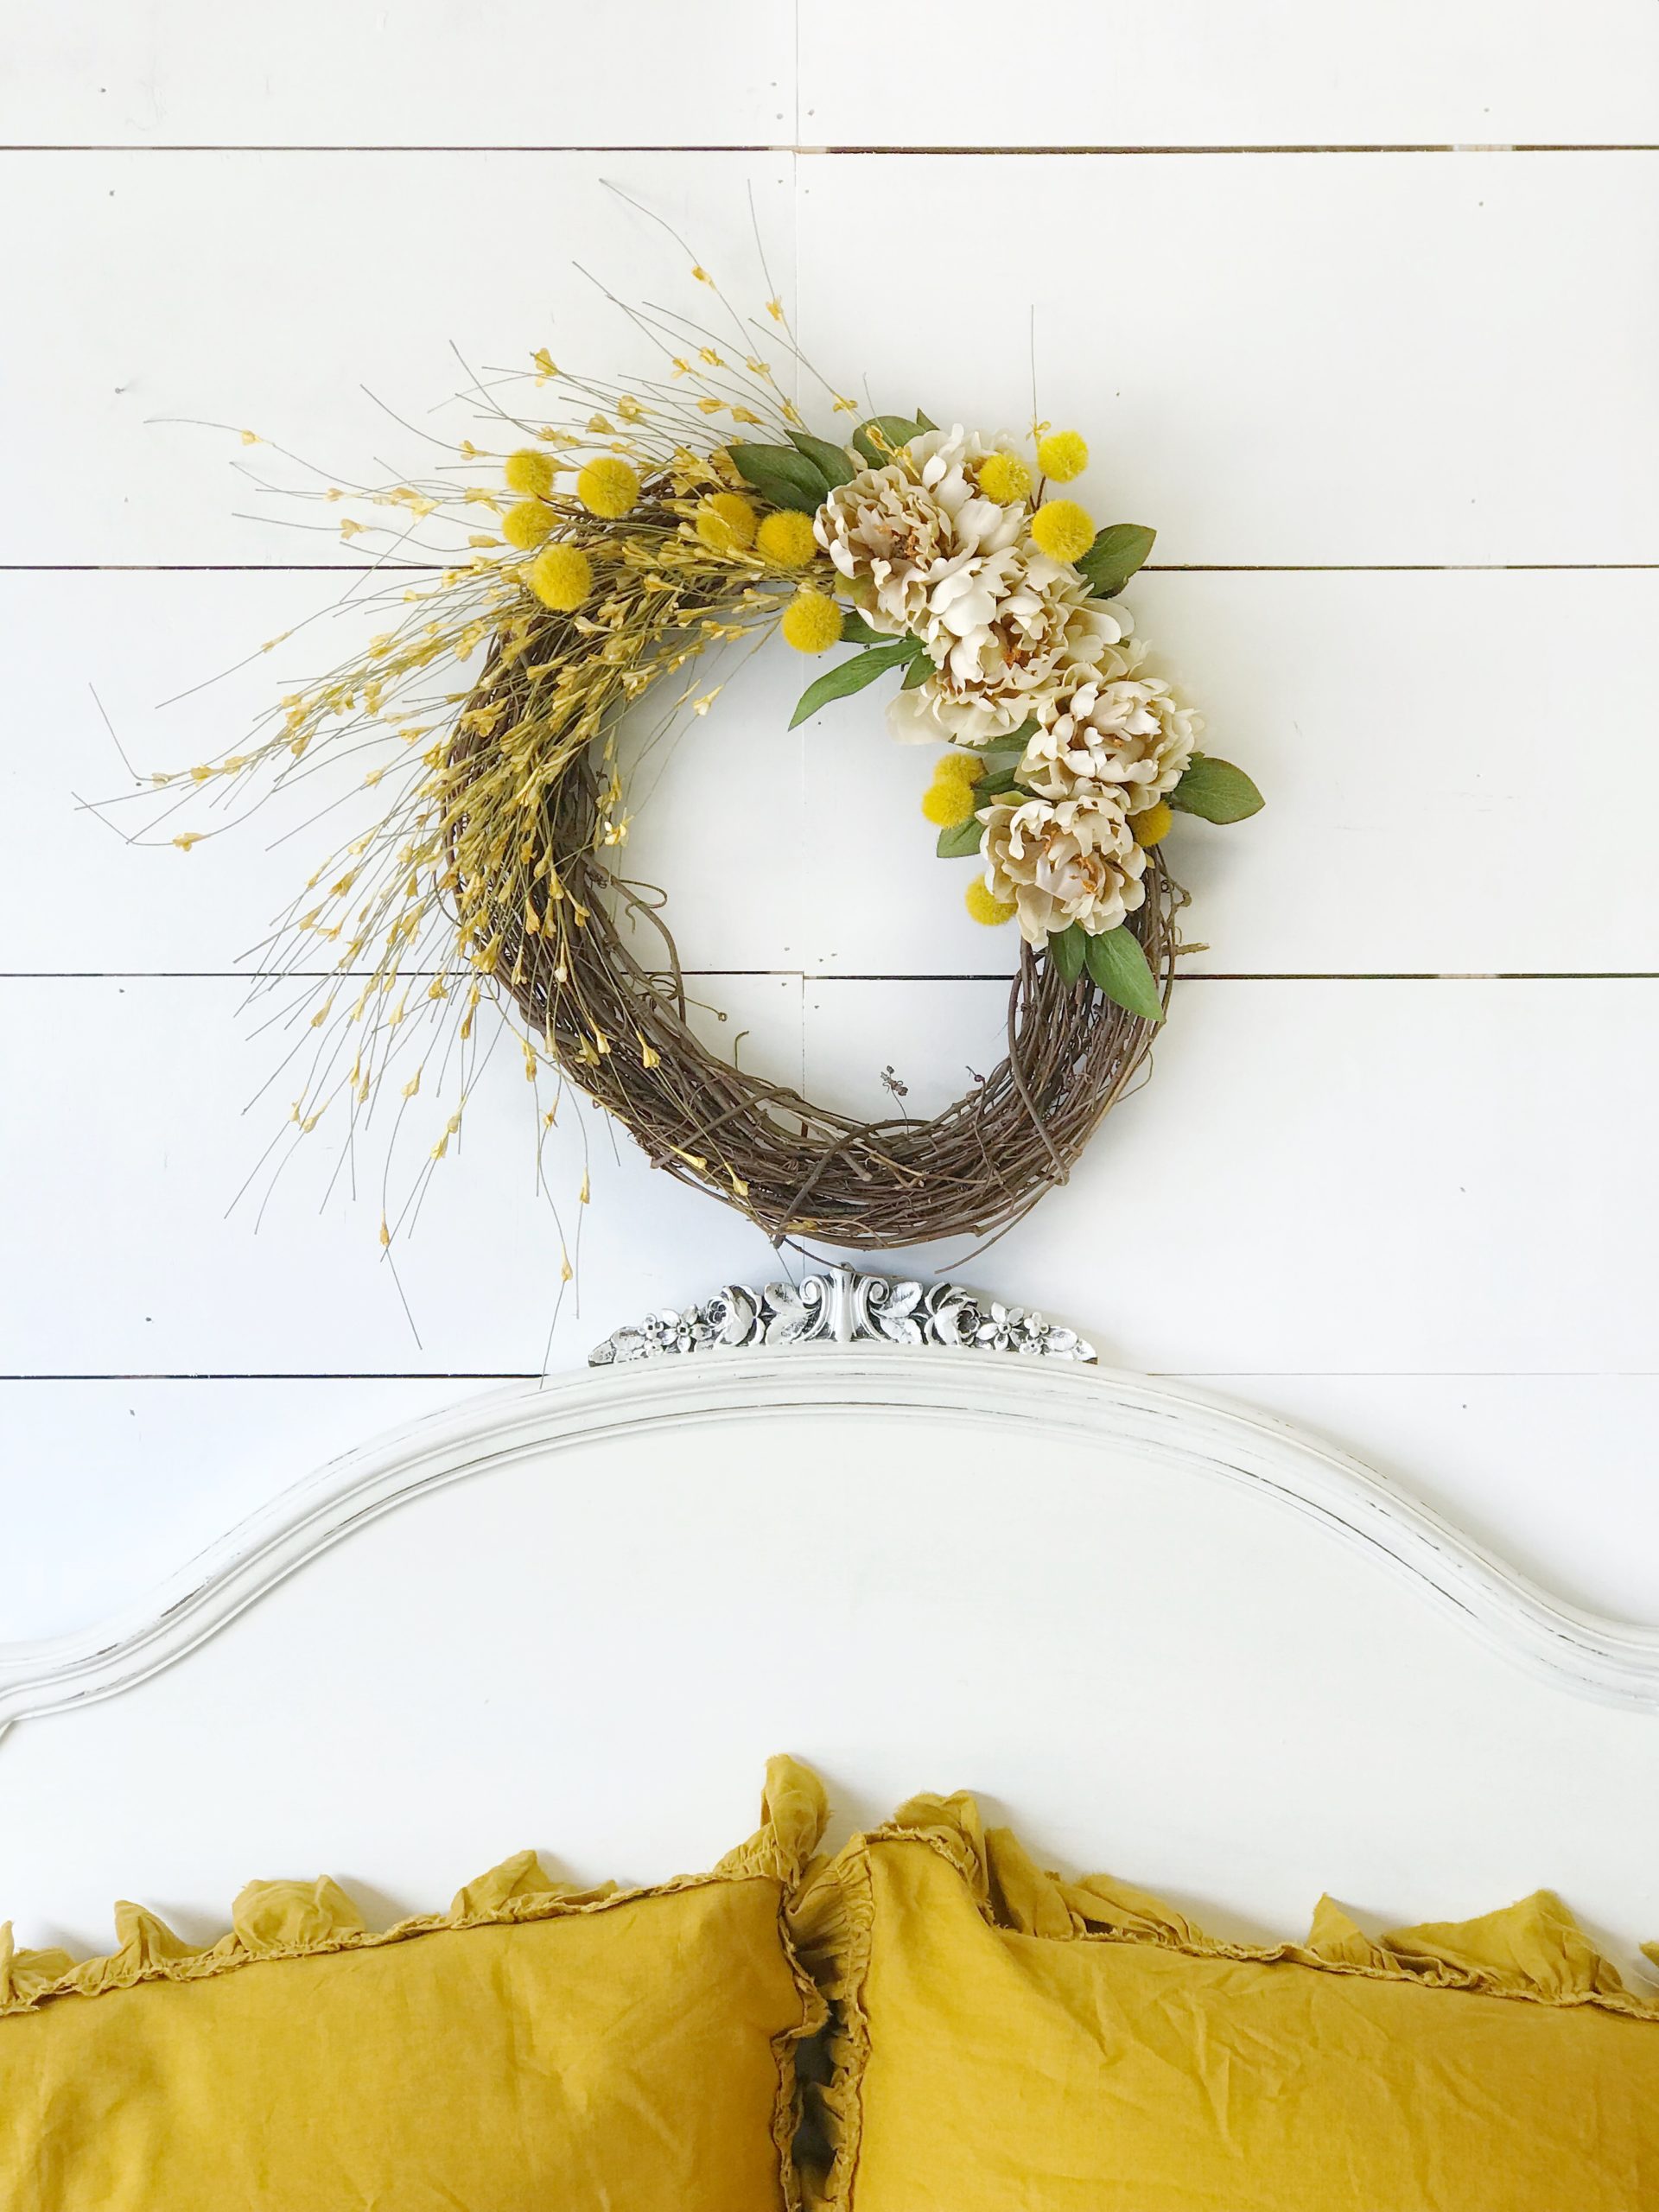 How to Make a Fall Wreath for Your Home